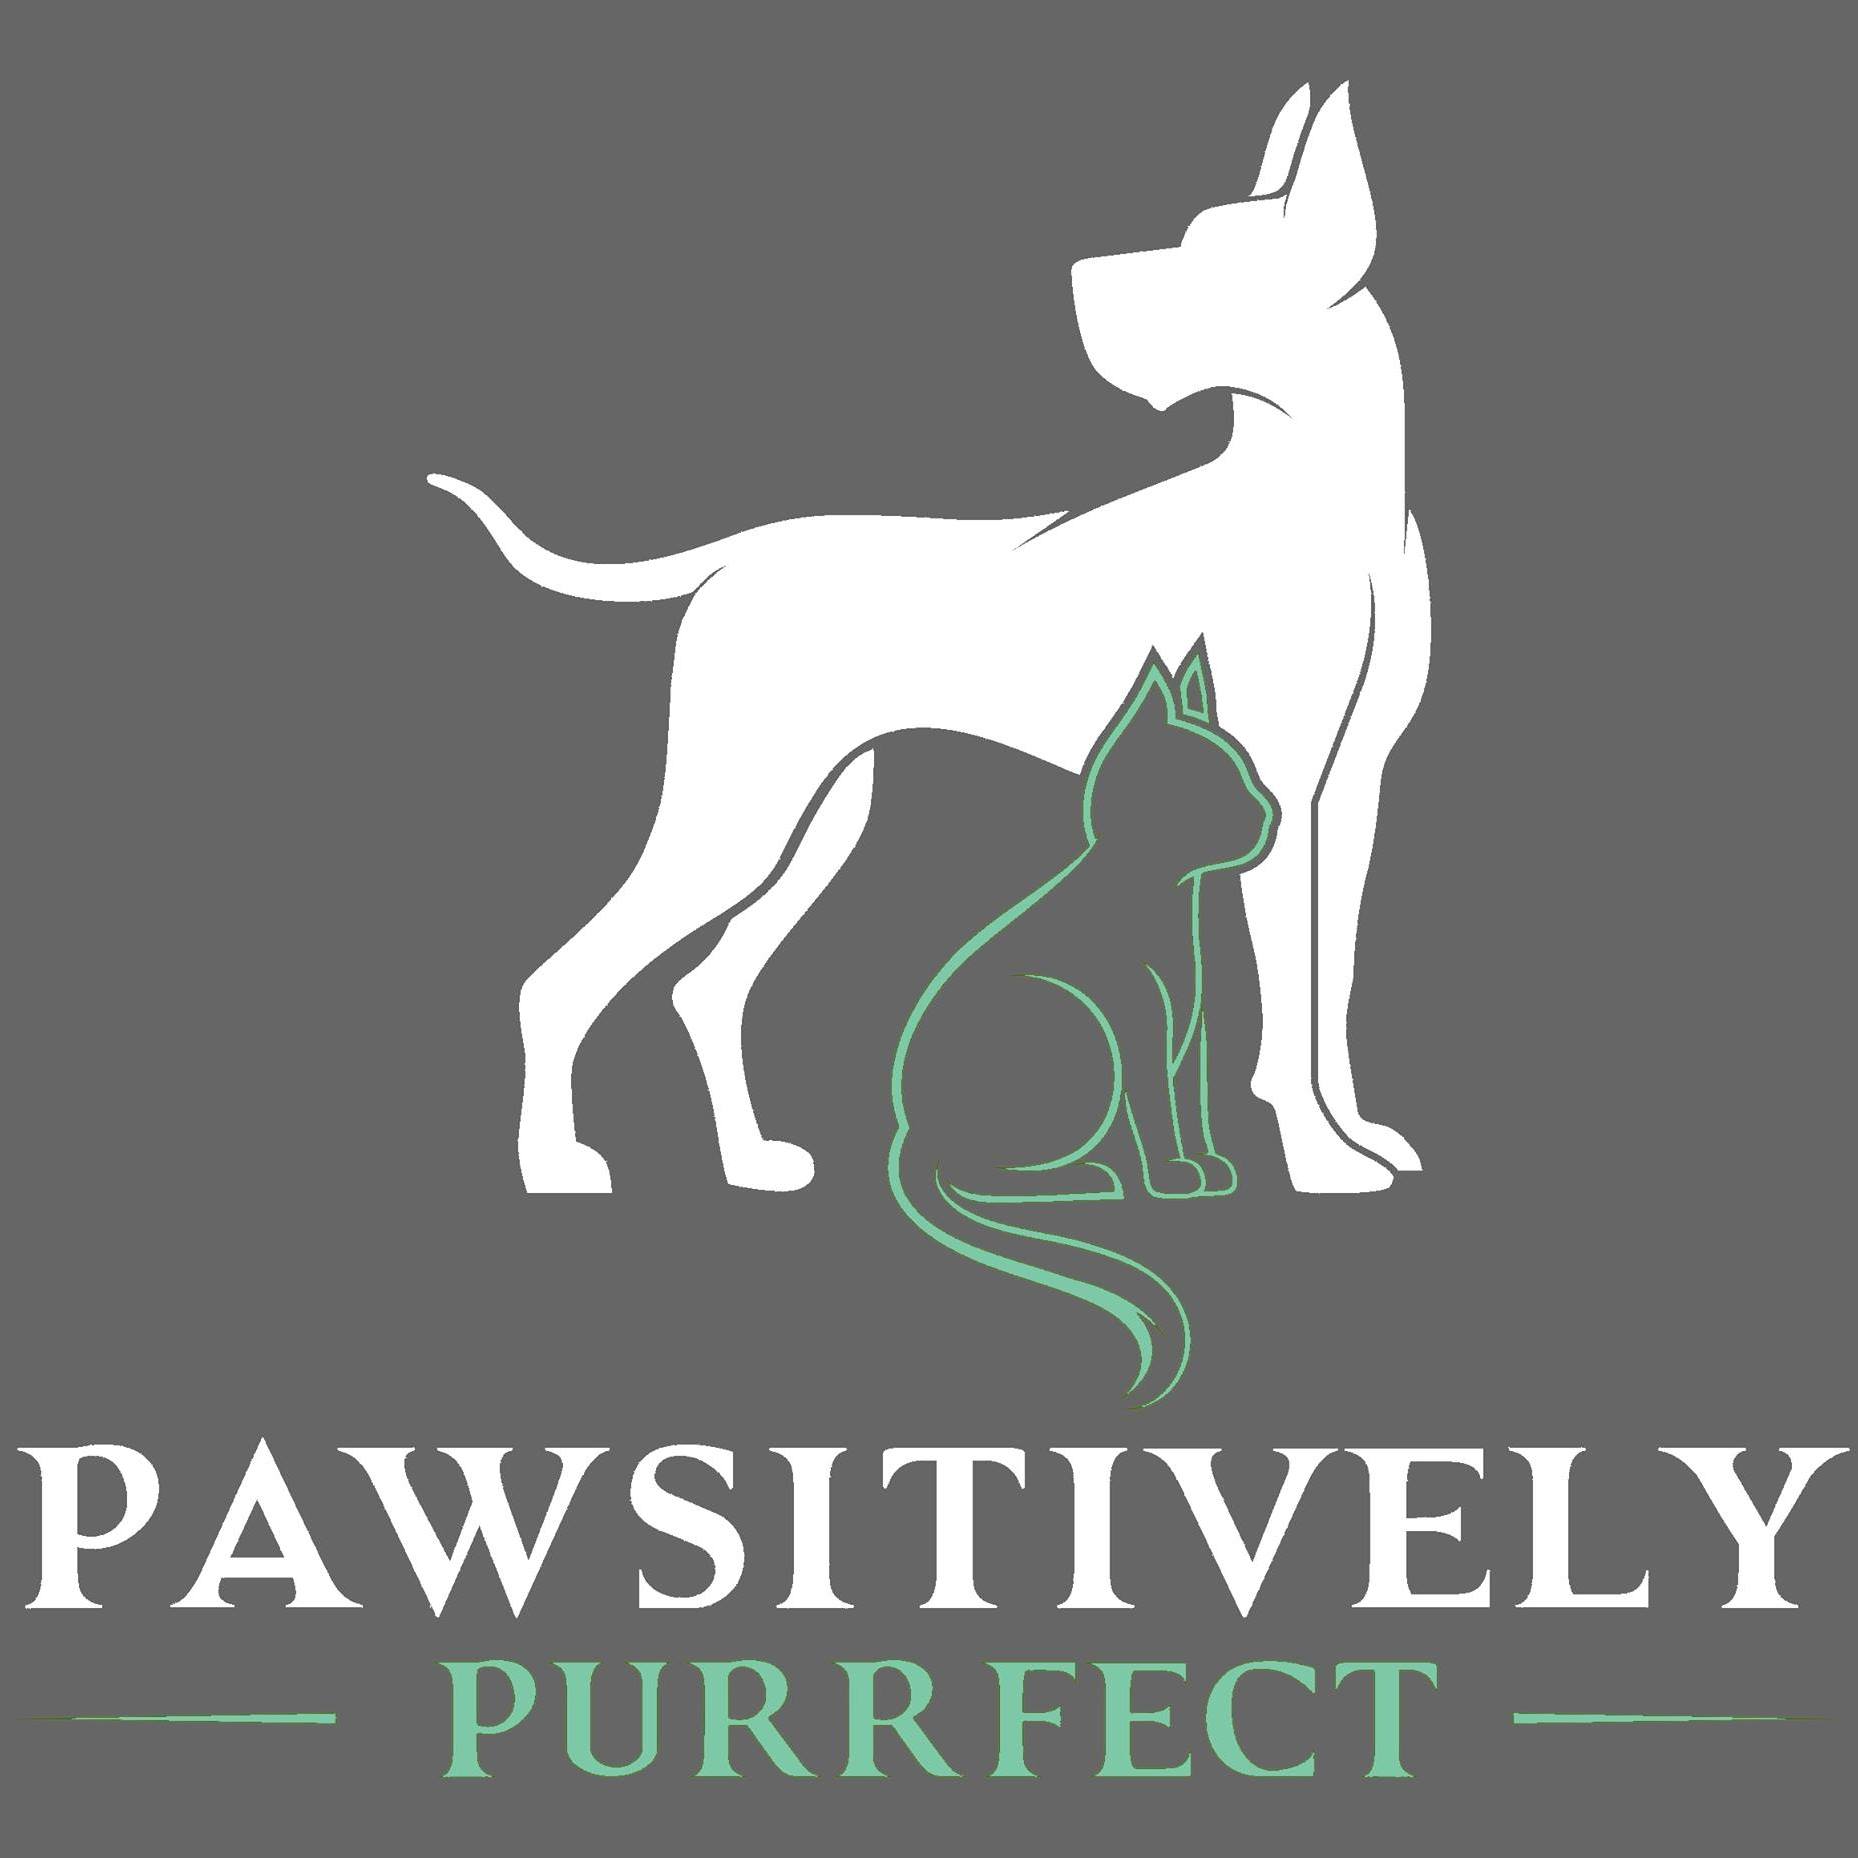 Company logo of Pawsitively Purrfect